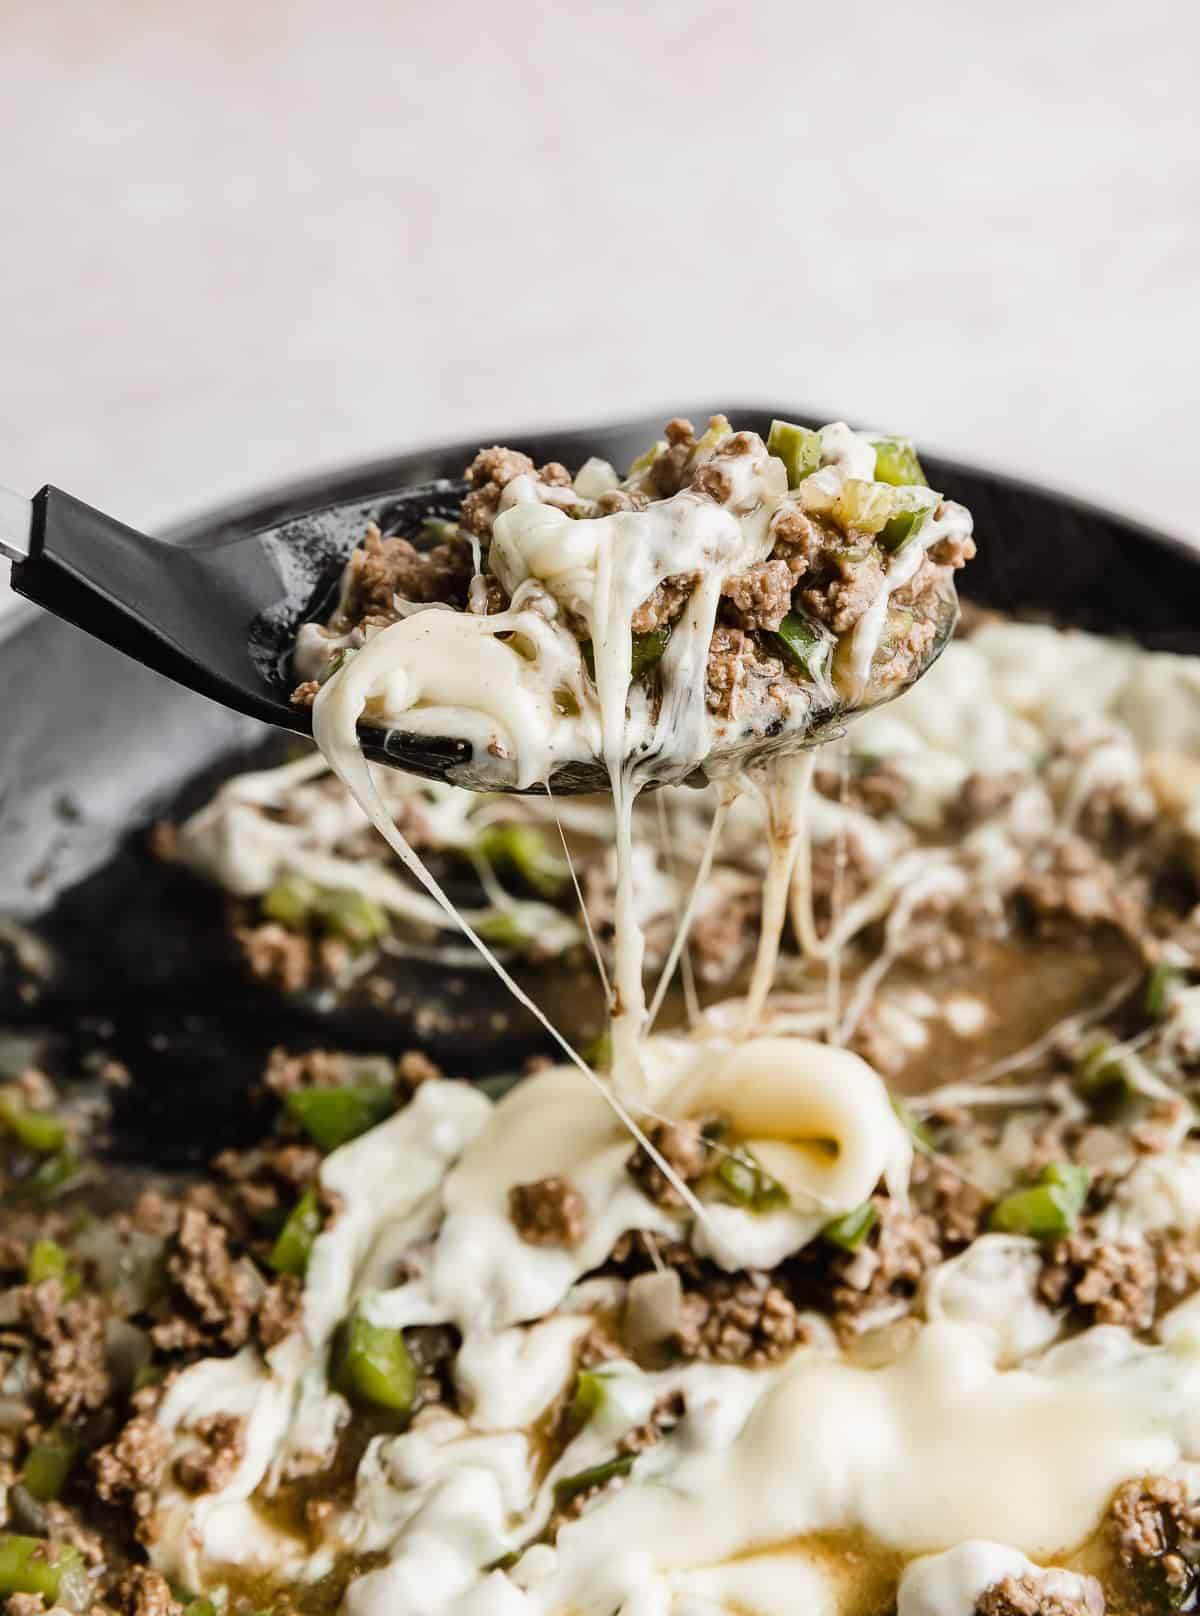 A large black spoon scooping up Philly Cheesesteak Sloppy Joes mixture from a skillet.